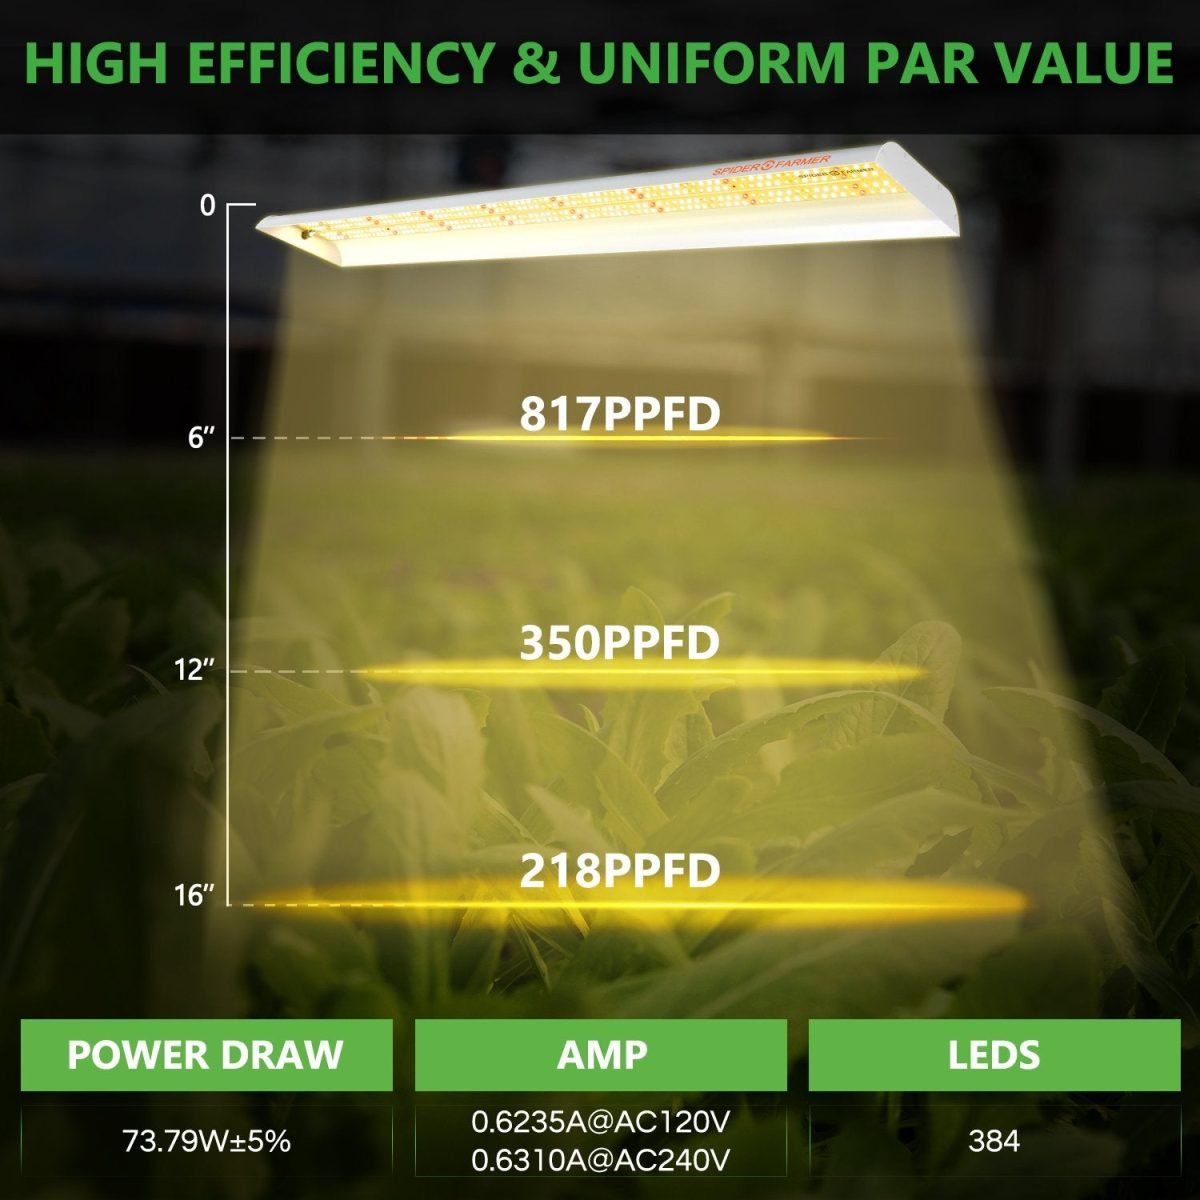 PPFD & Coverage of SF600 led